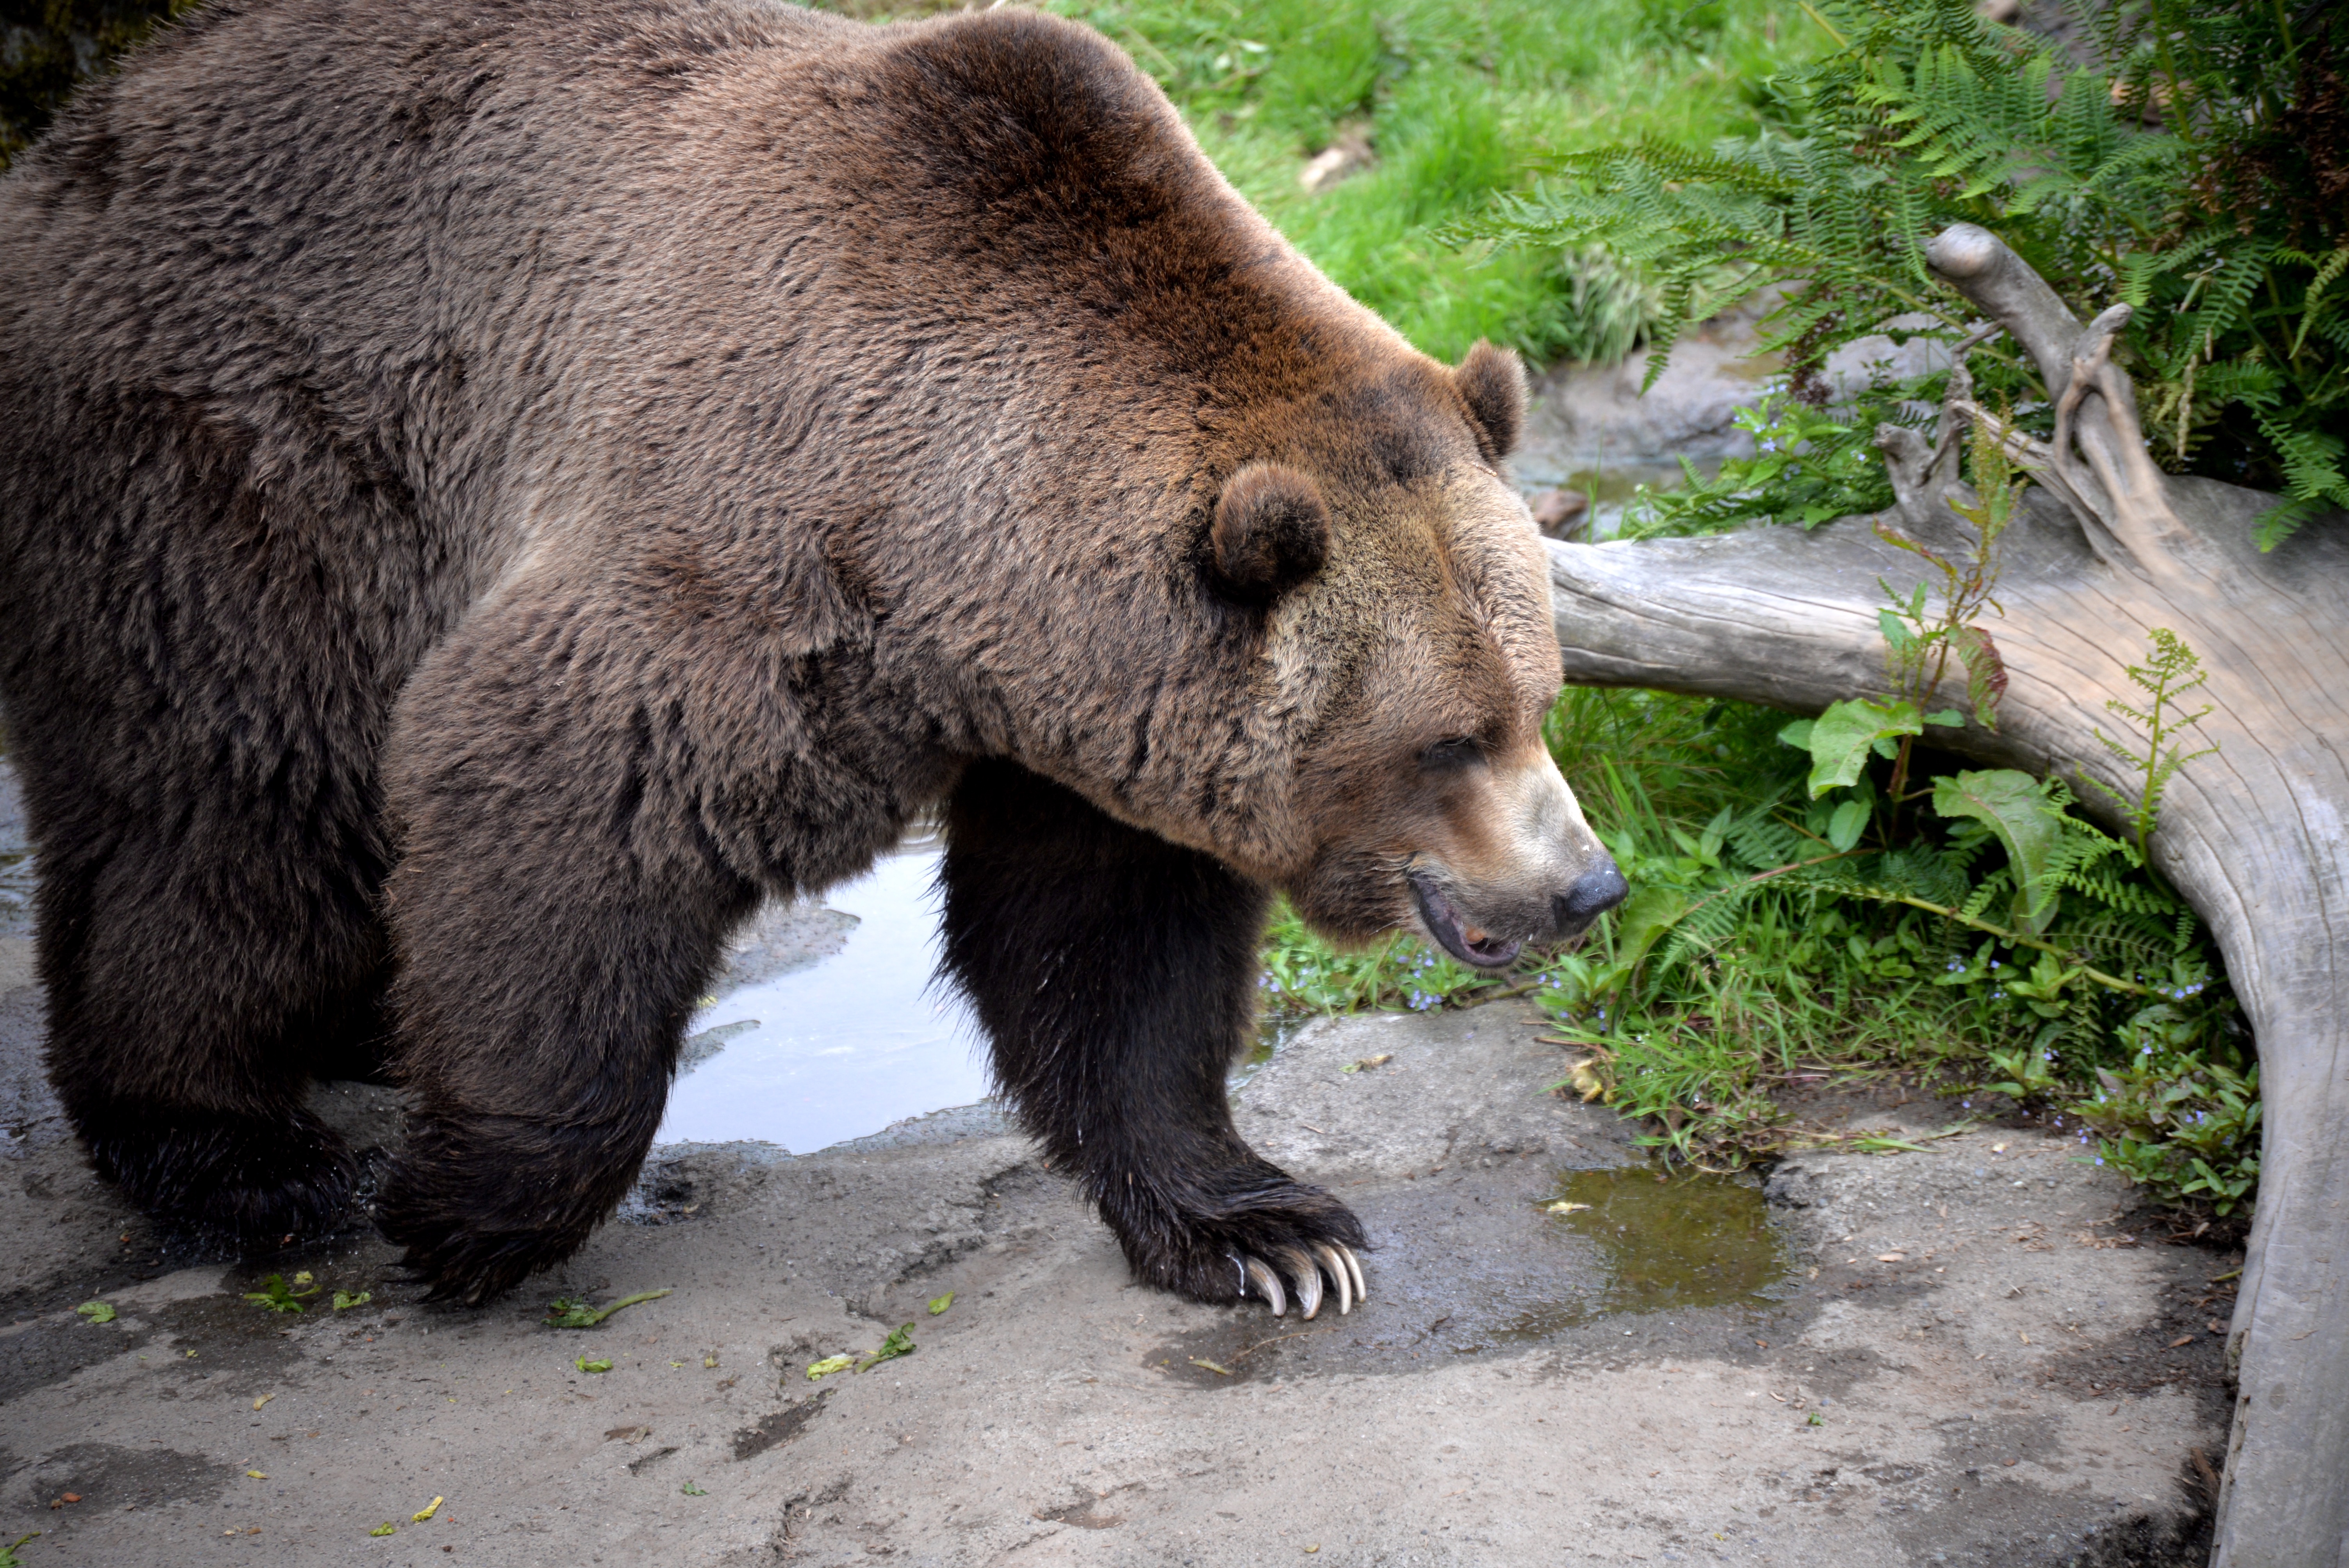 Brown bears are part of the Northern Trail exhibit